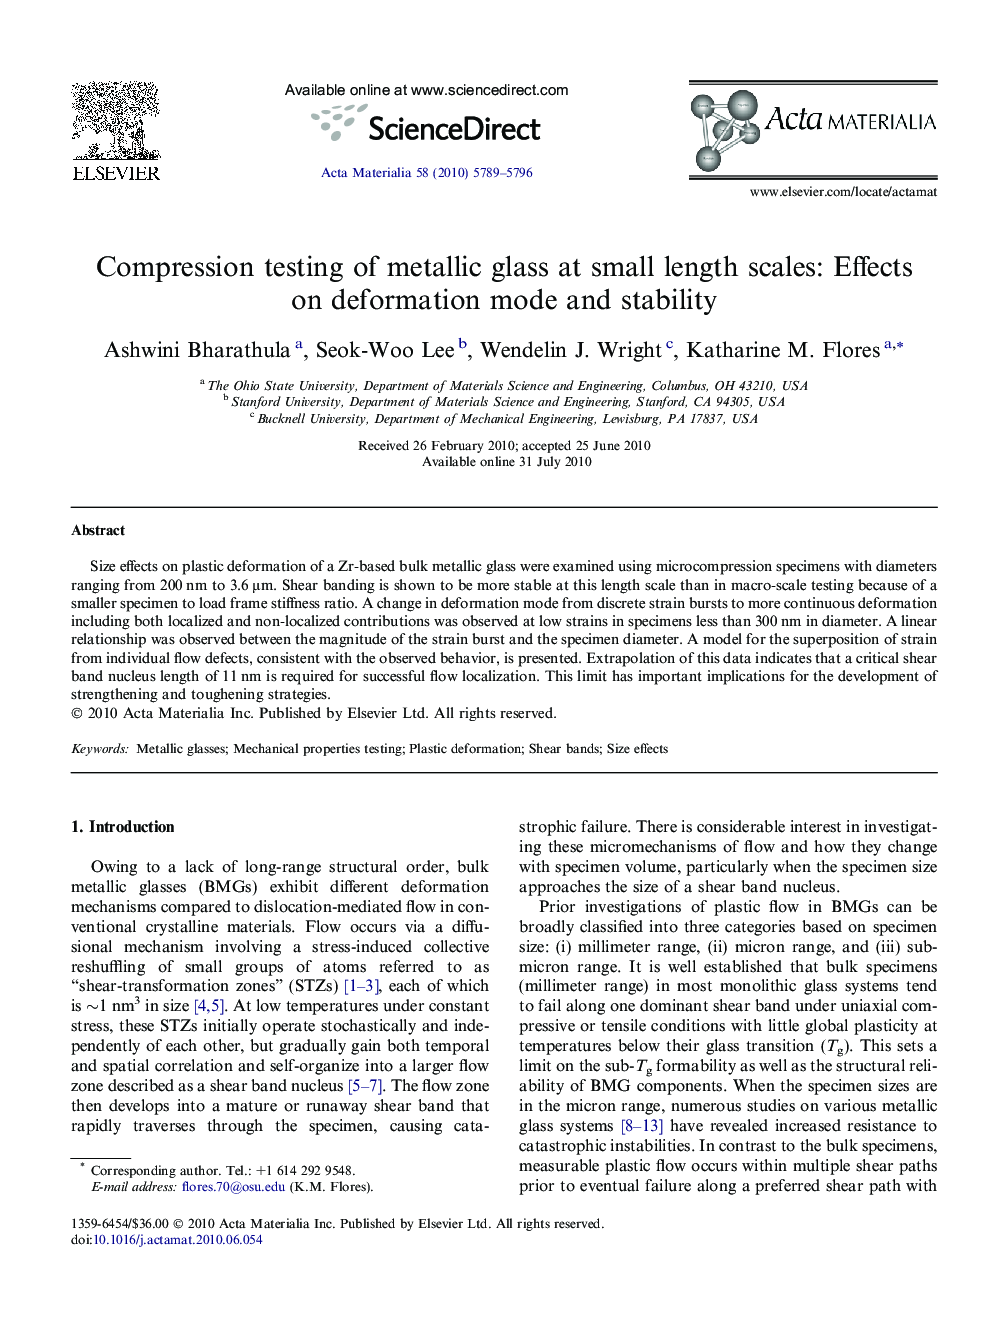 Compression testing of metallic glass at small length scales: Effects on deformation mode and stability